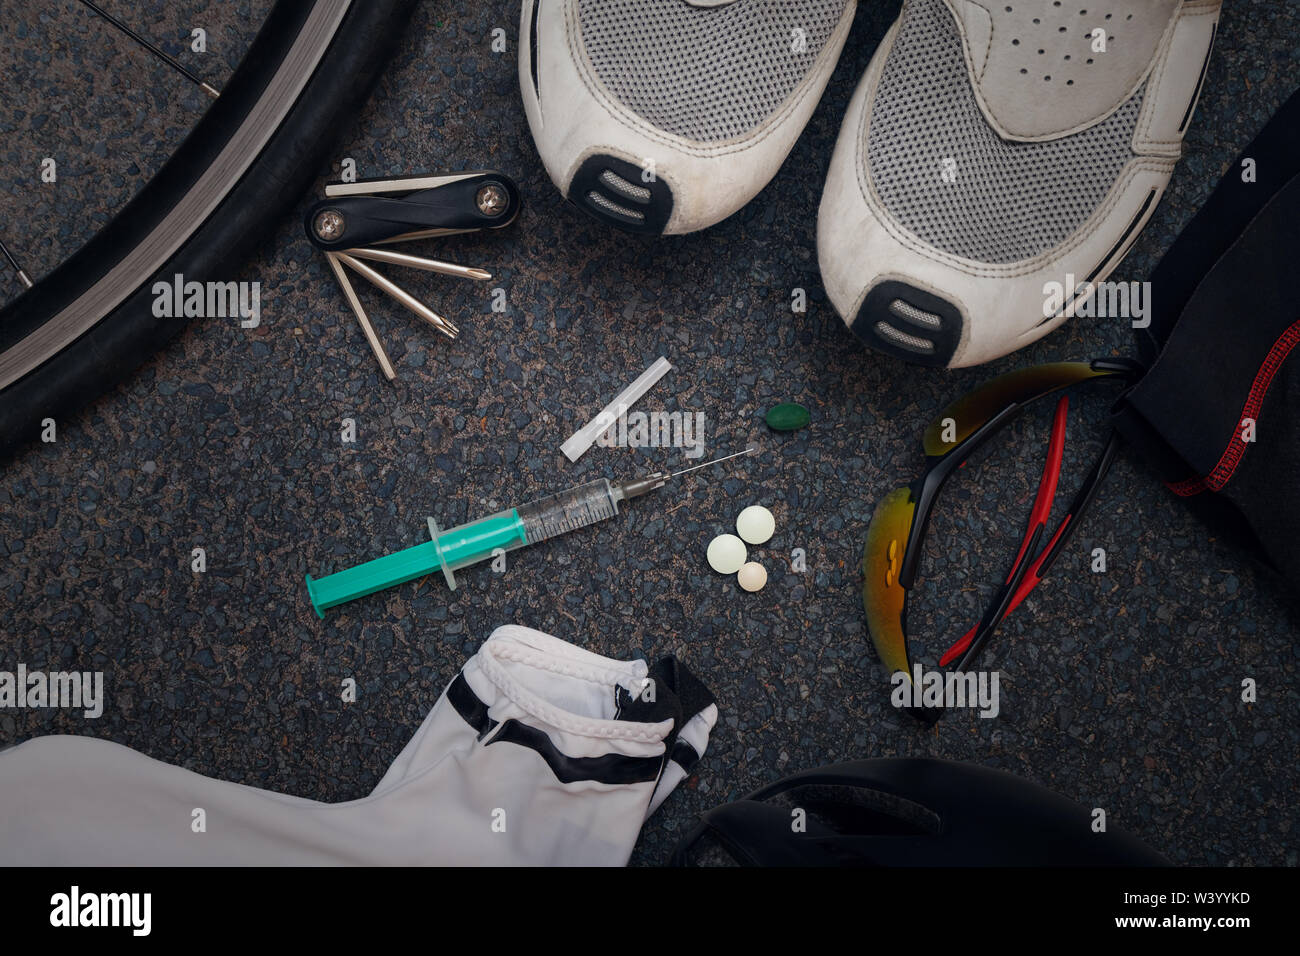 Cycling clothing and bike equipment on asphalt with a syringe and tablets in the middle, illustrating doping or the abuse of performance enhancing substances in amateur and professional sport. Stock Photo